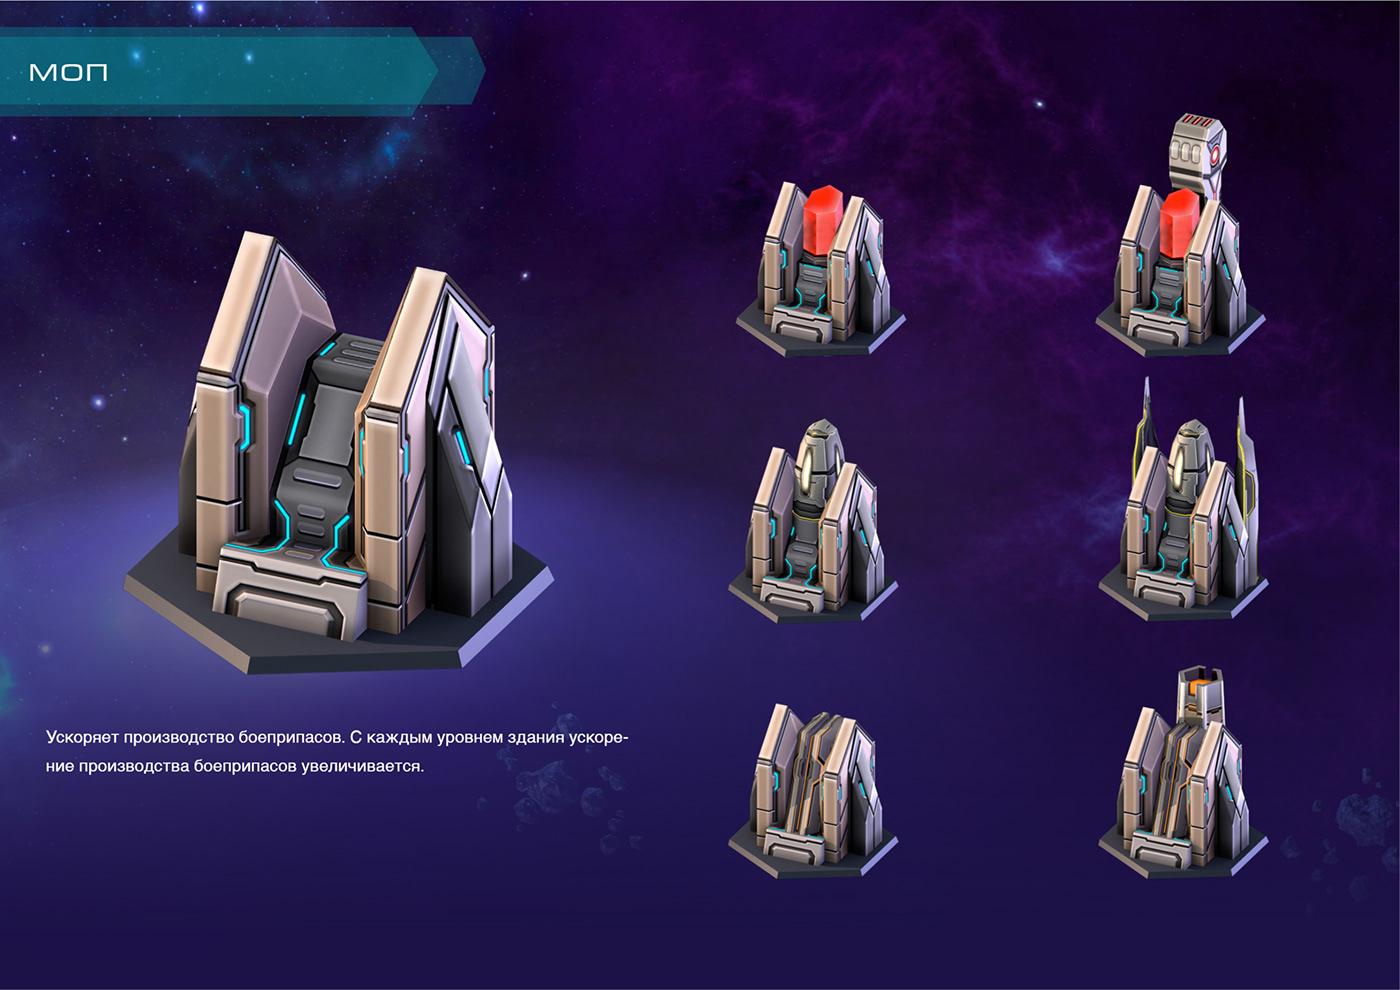 icons Games UI astrolords Sci Fi weapons skills 2D art ArtDirection product design 